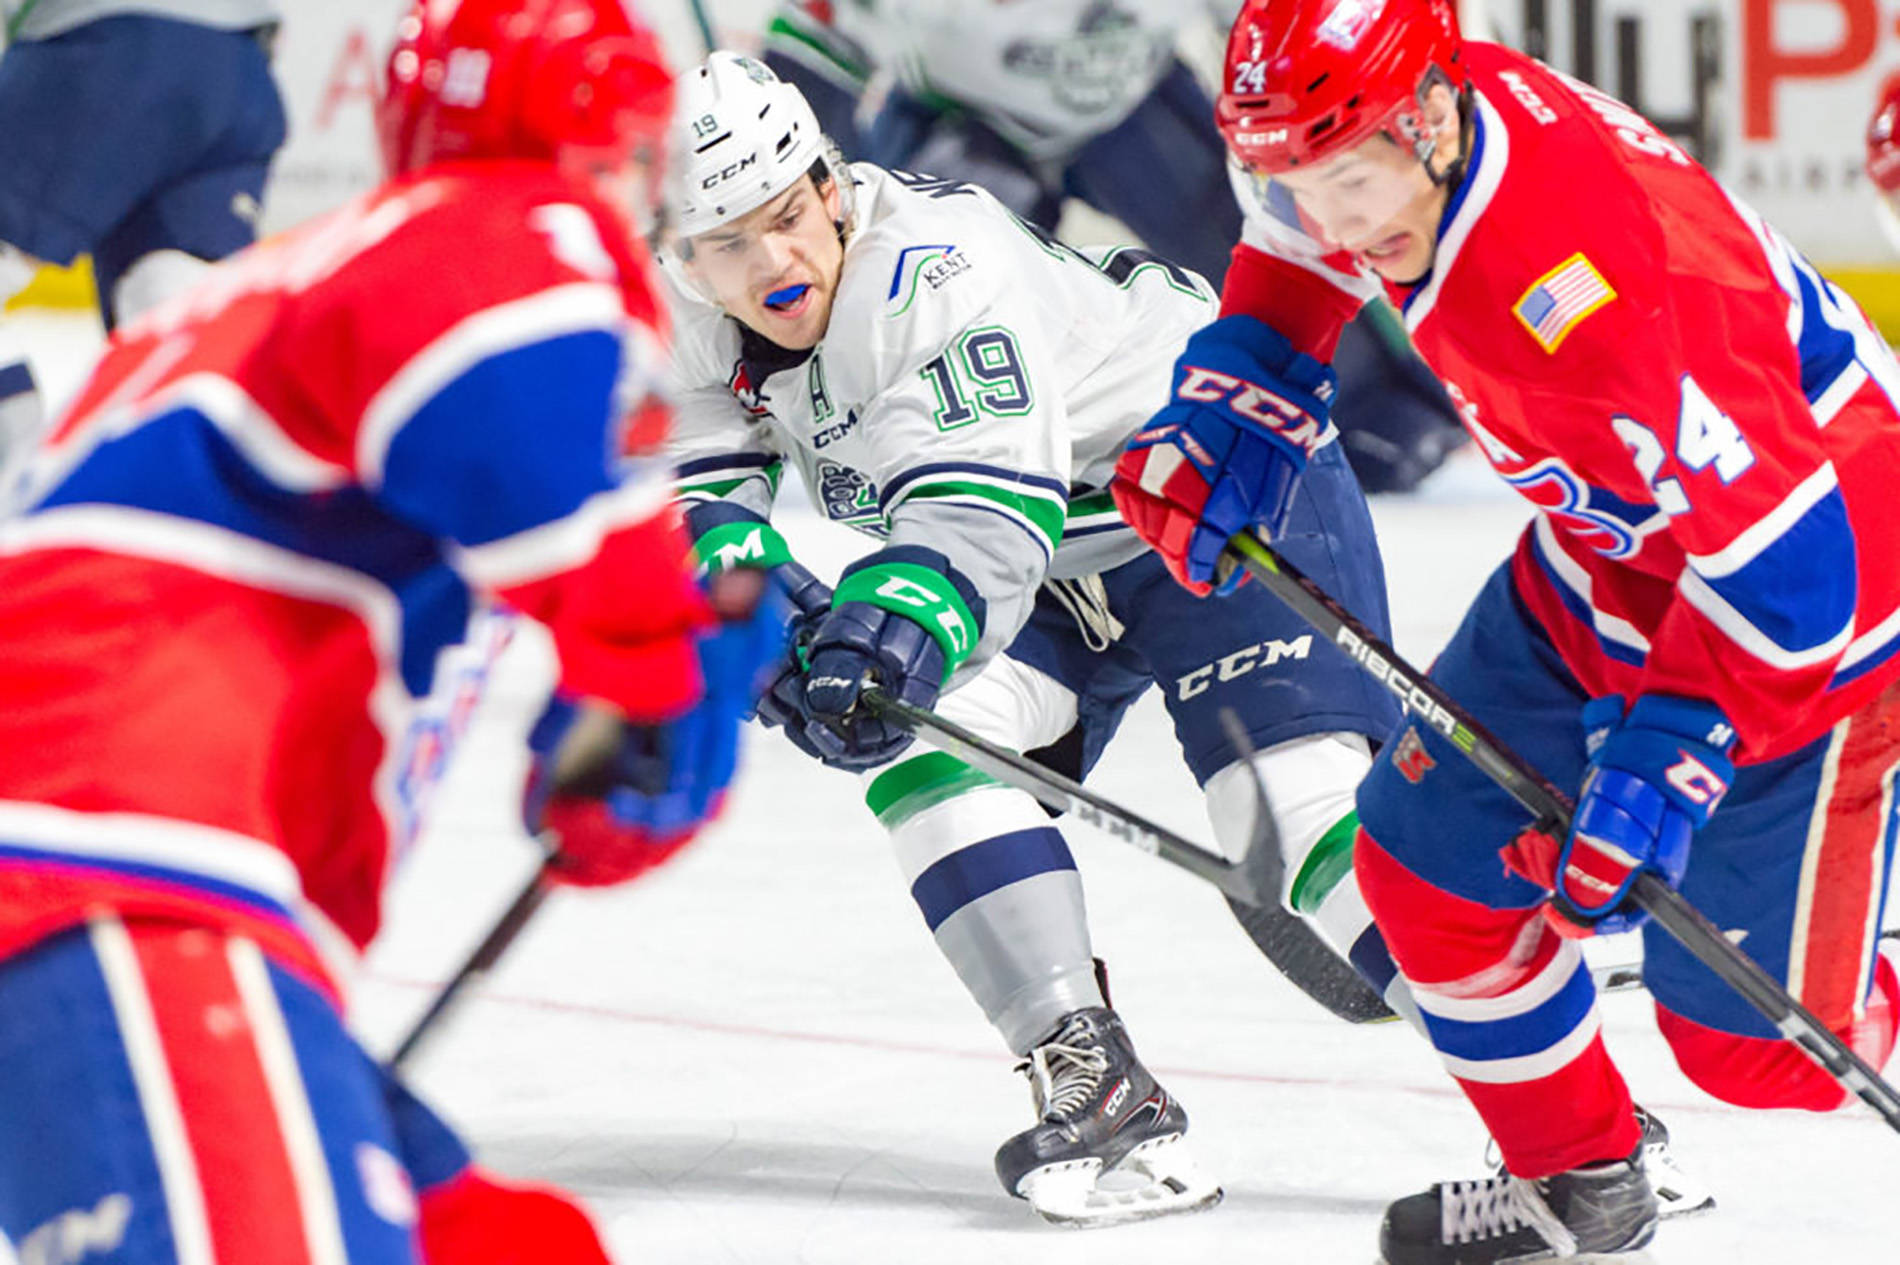 Thunderbirds center Donovan Neuls fights for the puck during WHL play against Spokane on Saturday night at the accesso ShoWare Center. COURTESY PHOTO, Brian Liesse/T-Birds